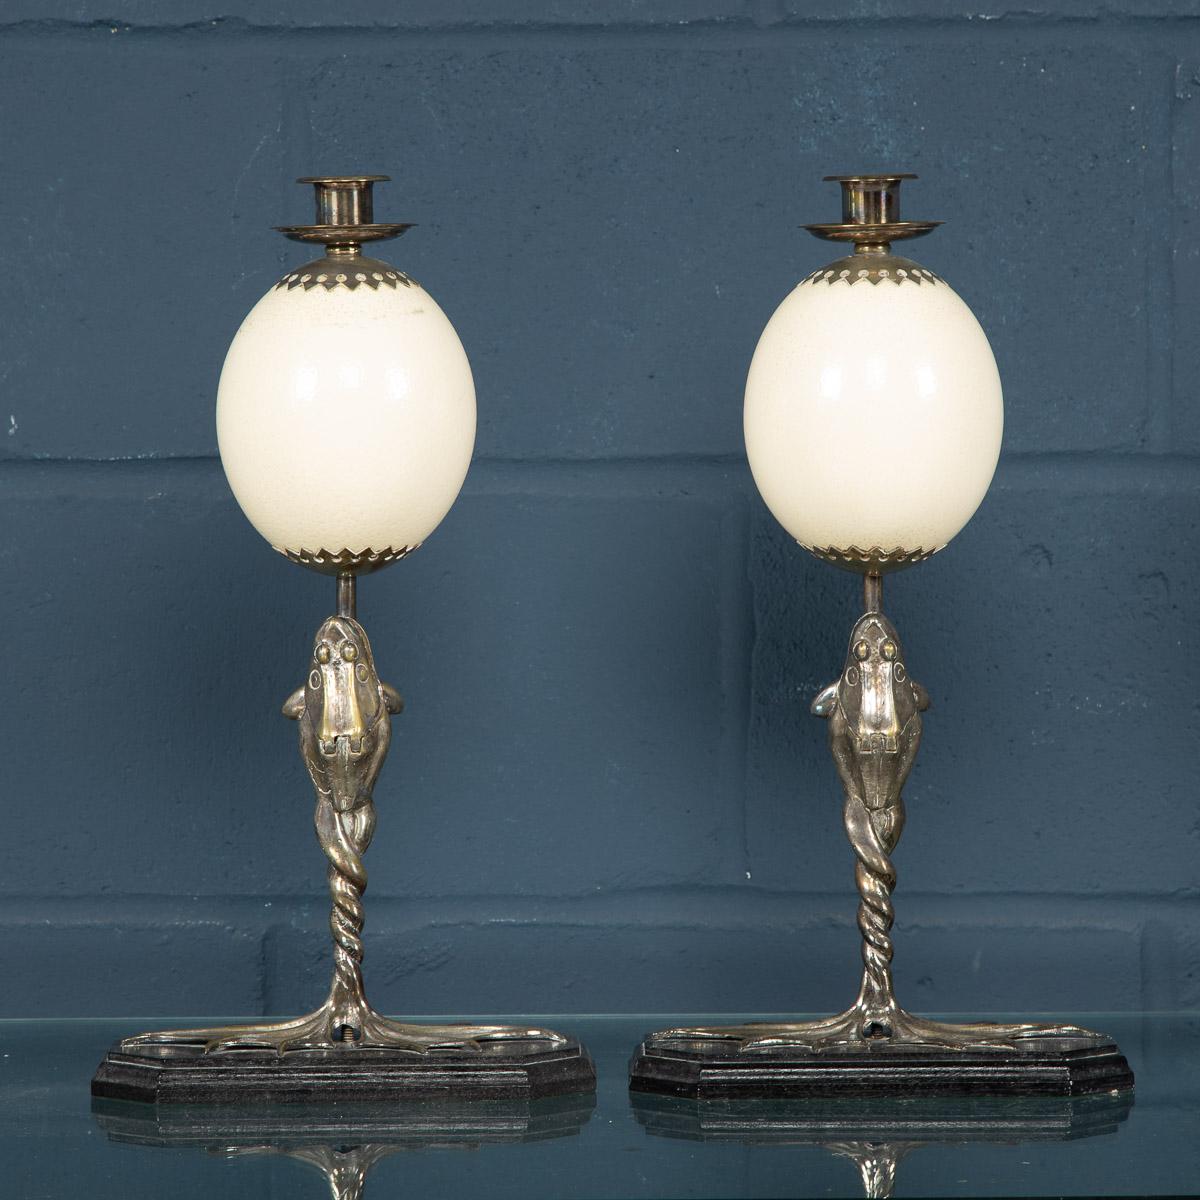 A rare pair of candlesticks by Anthony Redmile. Two ostrich eggs on silver plated mounts fashioned as frogs with mouths that open to reveal a compartment for matches. Anthony Redmile burst into the London interior design scene in the 1960s,